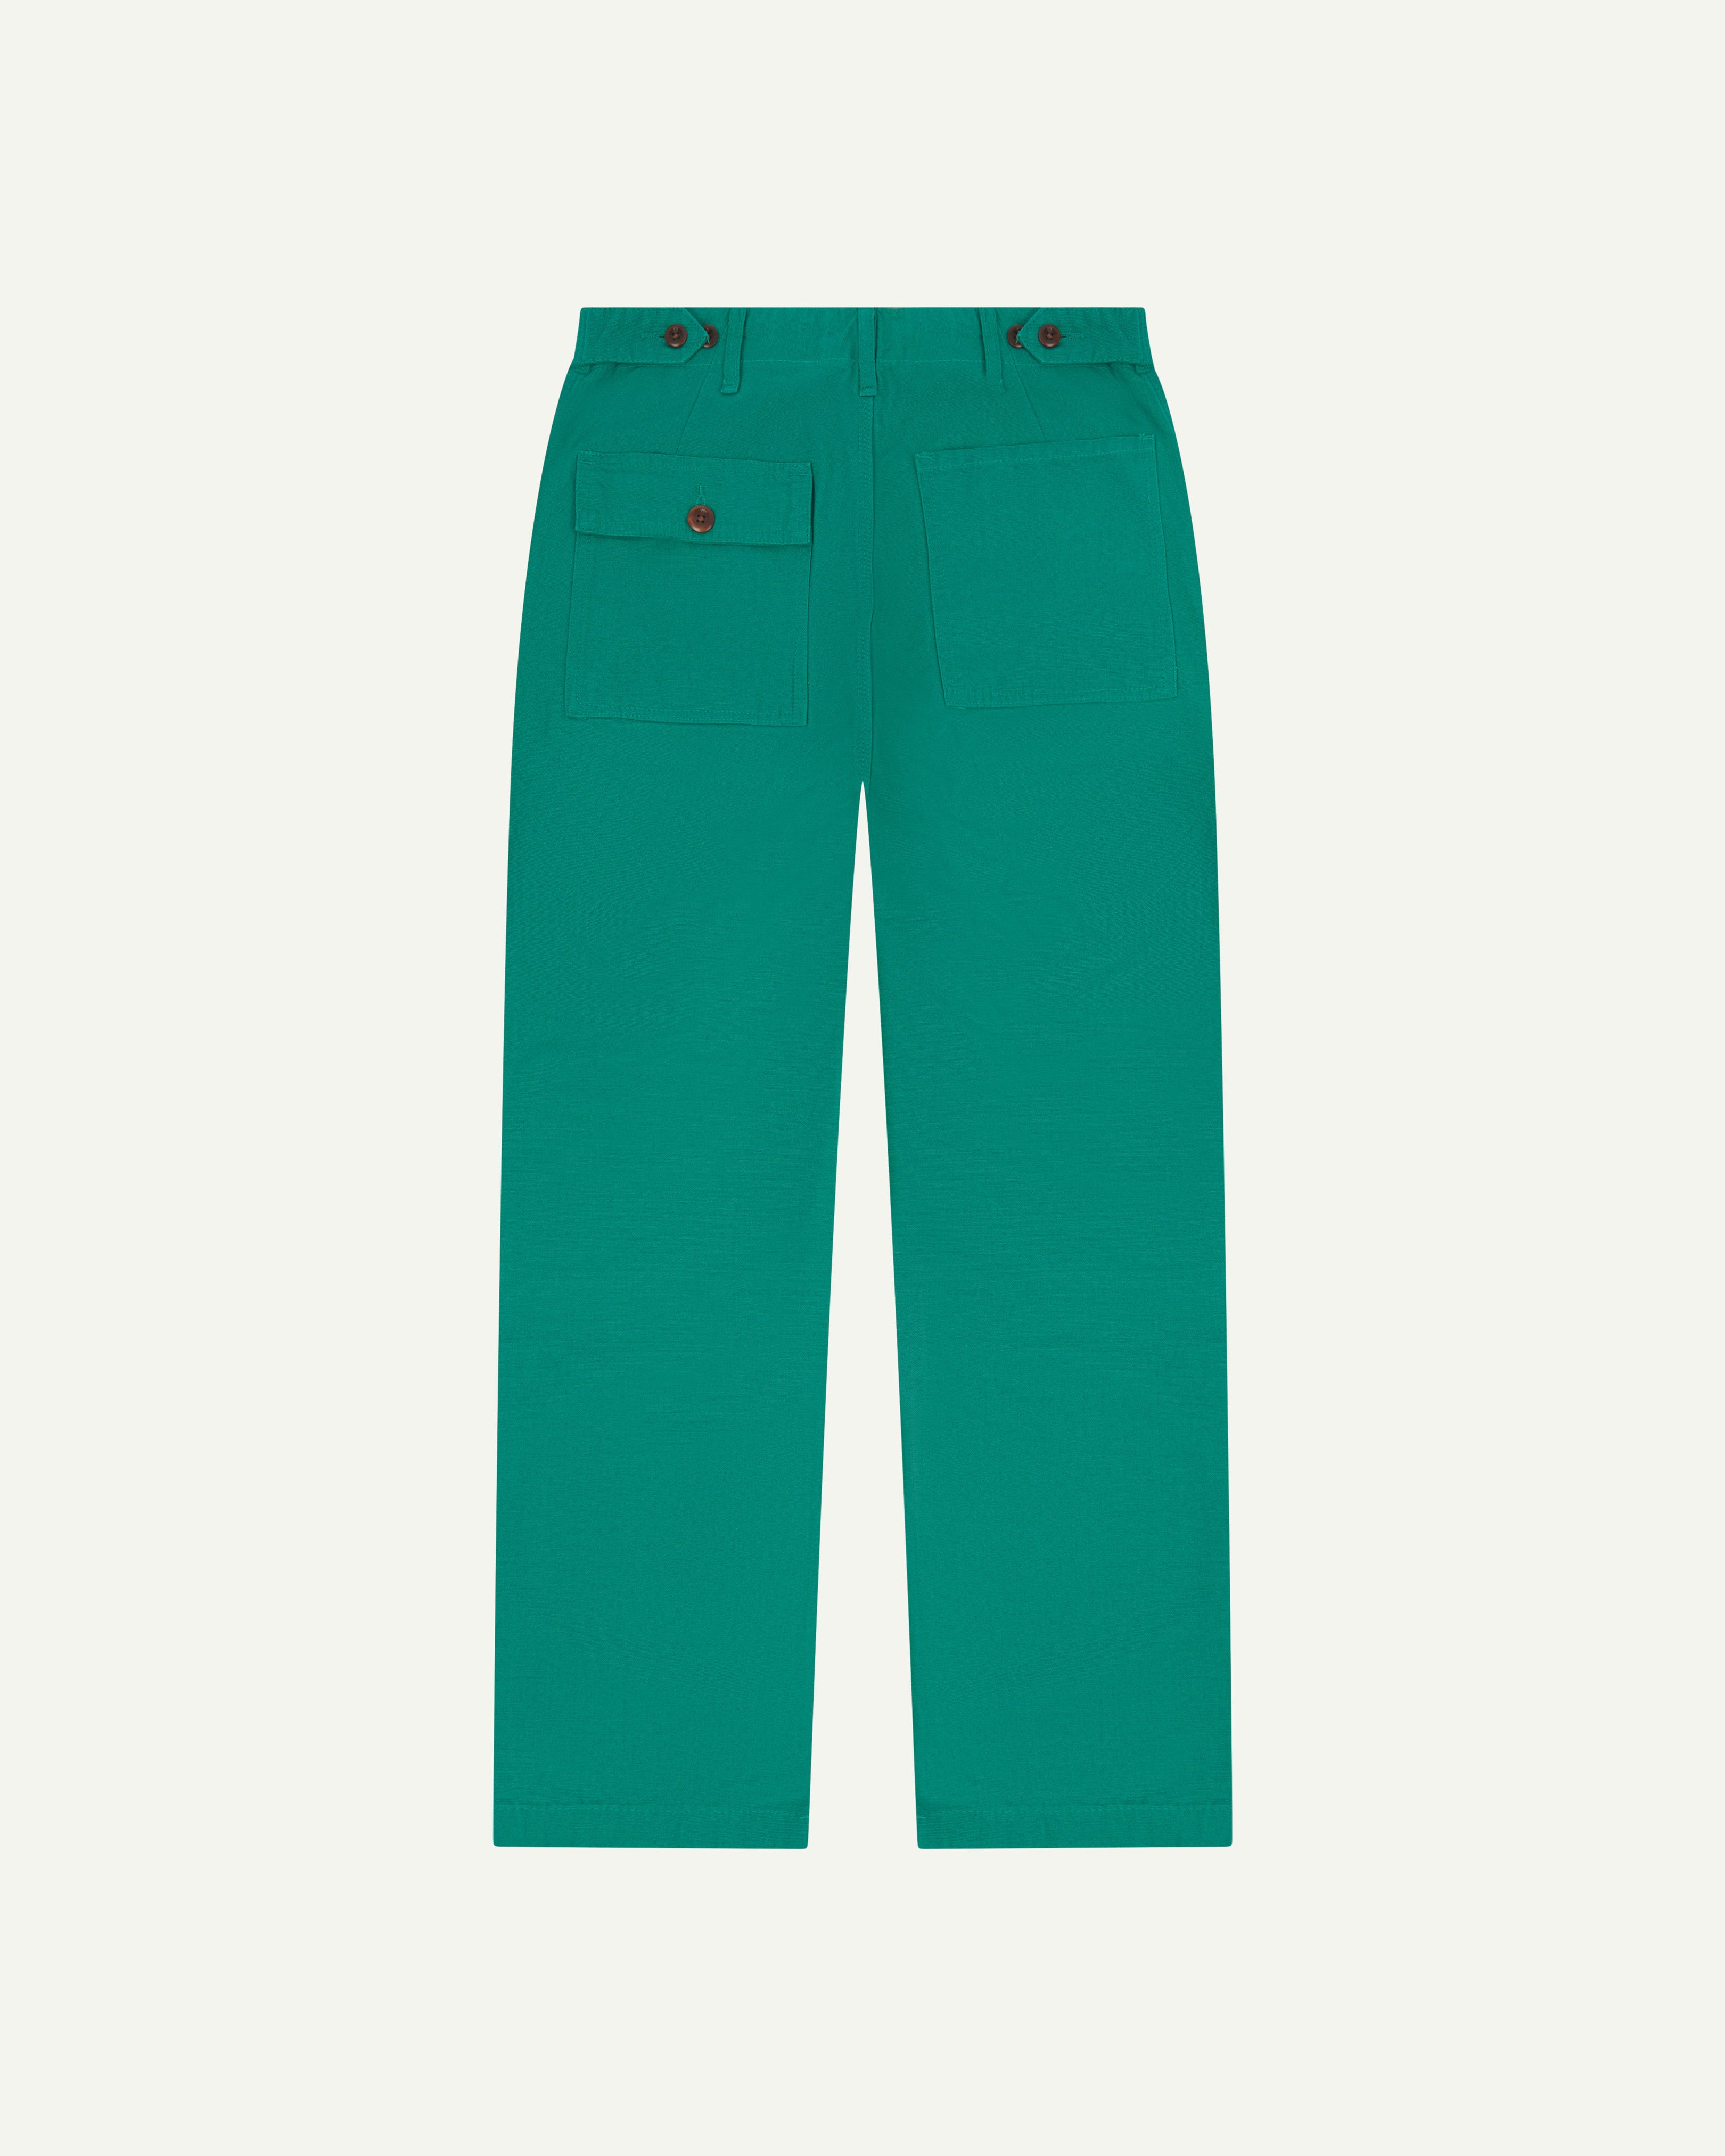 Flat view of back of #5005 Uskees men's organic cotton 'foam green' coloured trousers on white background.